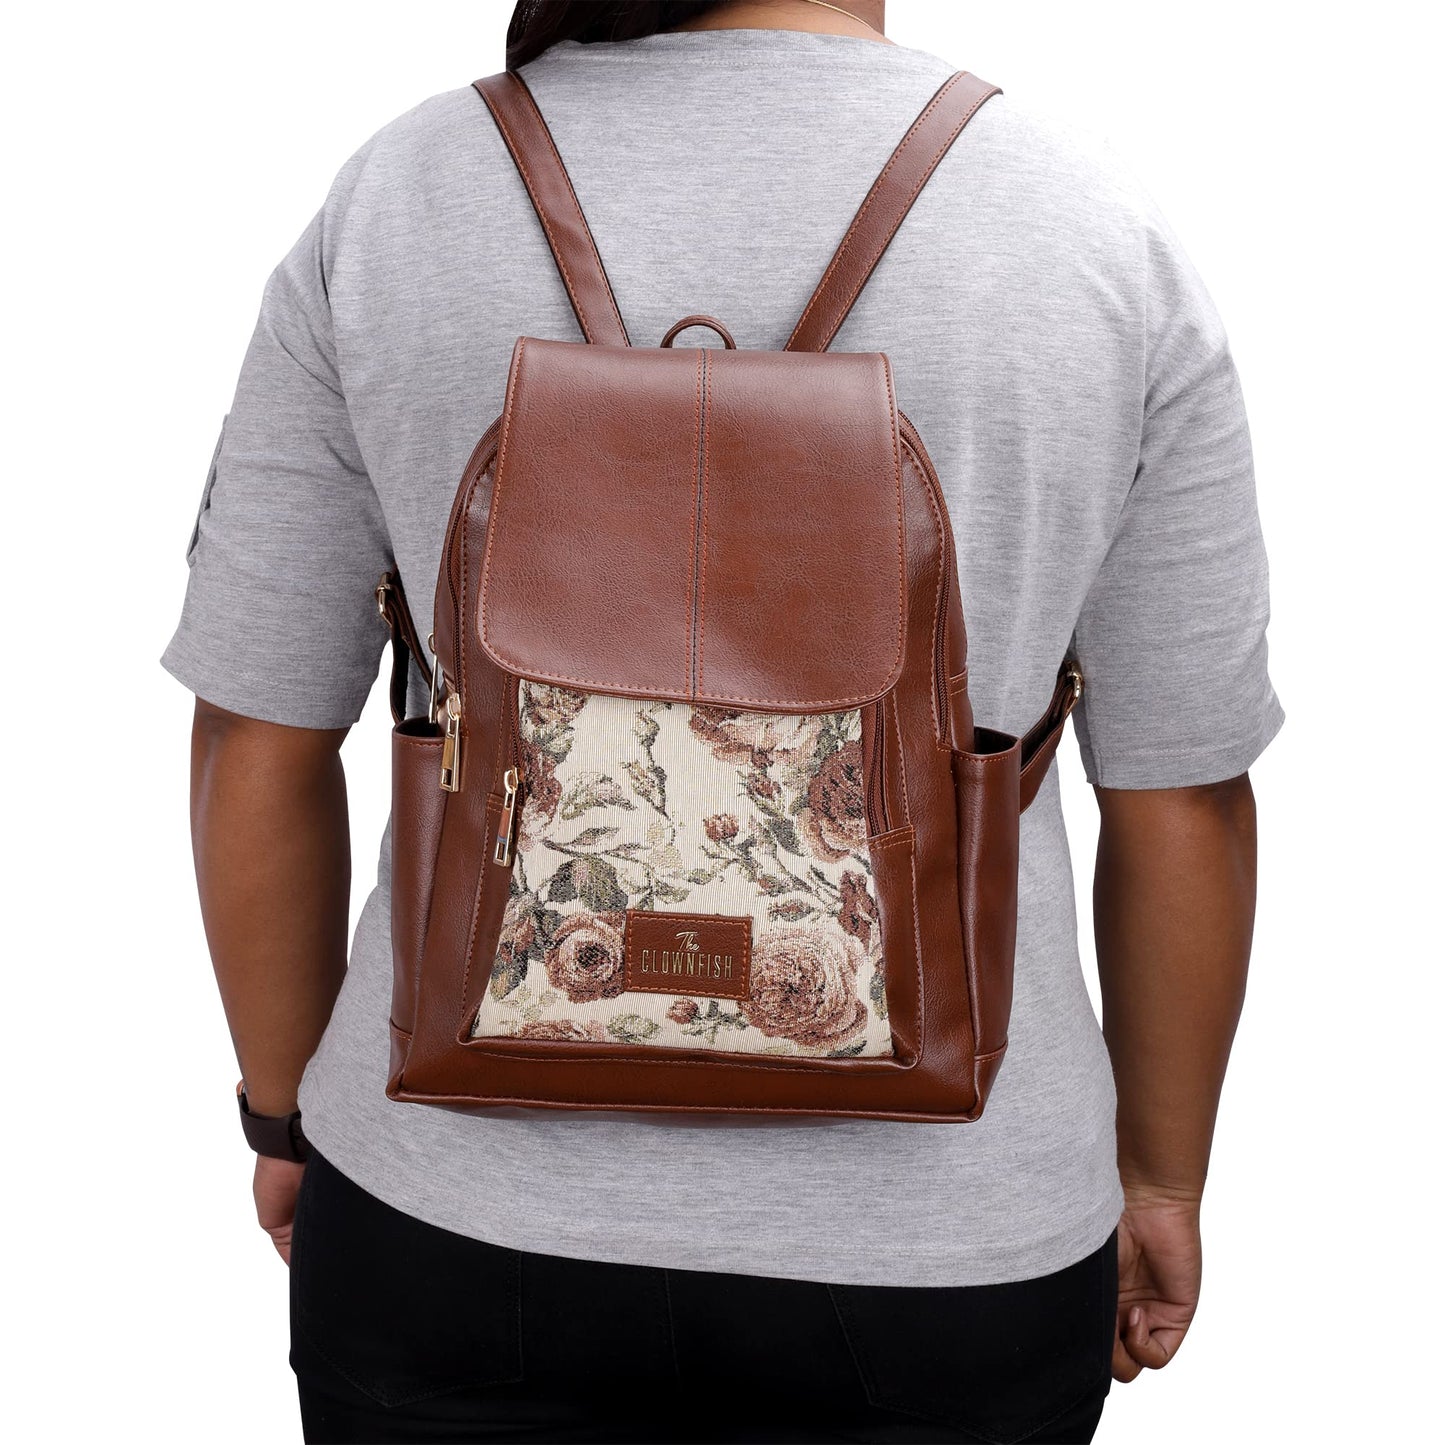 The Clownfish Medium Size Minerva Faux Leather  Tapestry WomenS Backpack College School Bag Casual Travel Backpack For Ladies Girls Brown- Floral